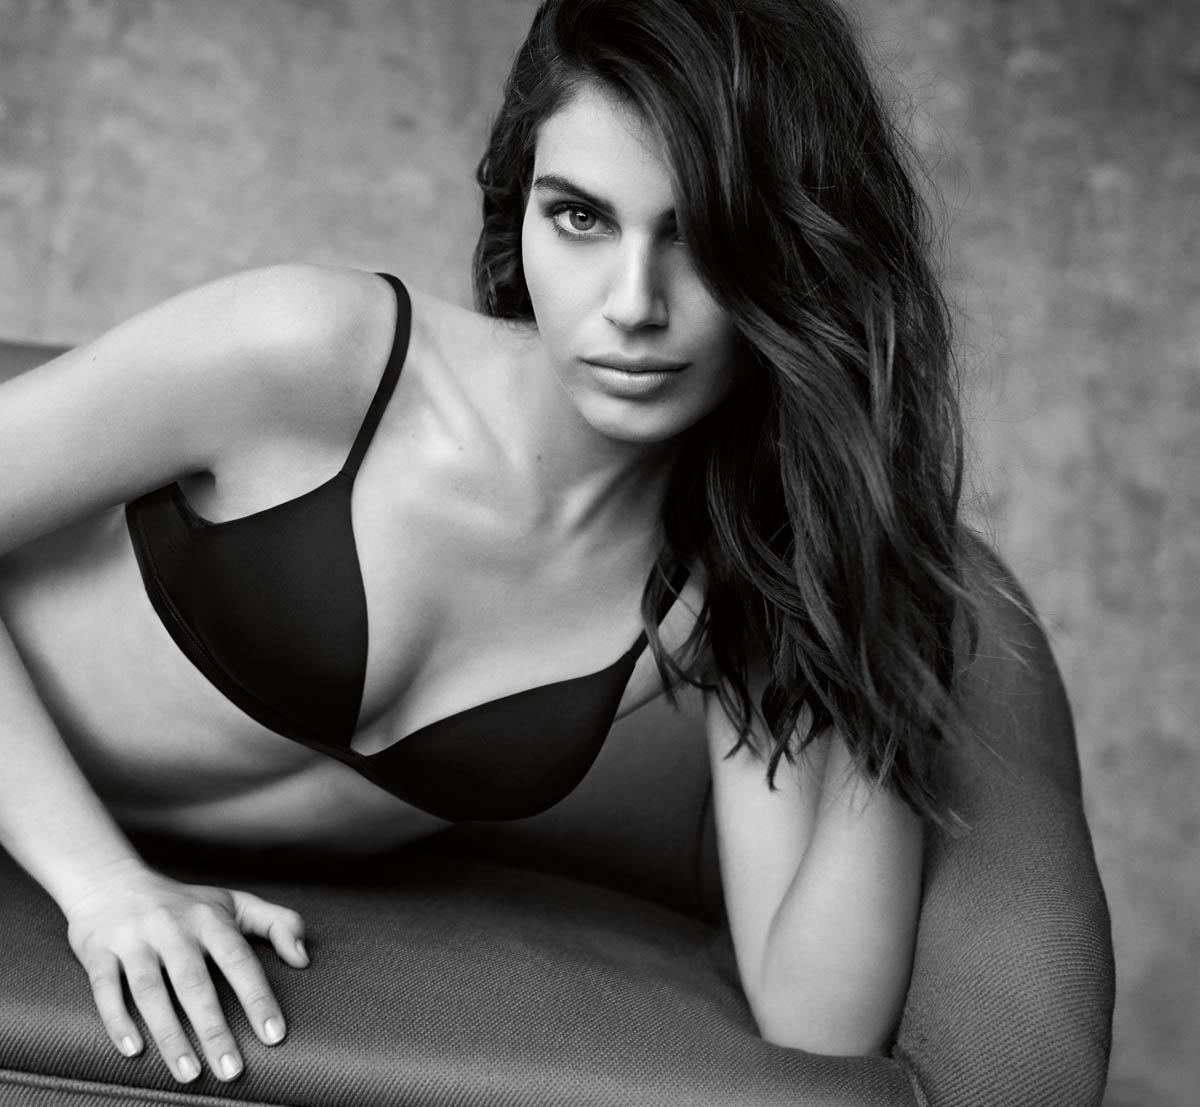 Irina Shayk to star in a new project called The Perfect Bra Book